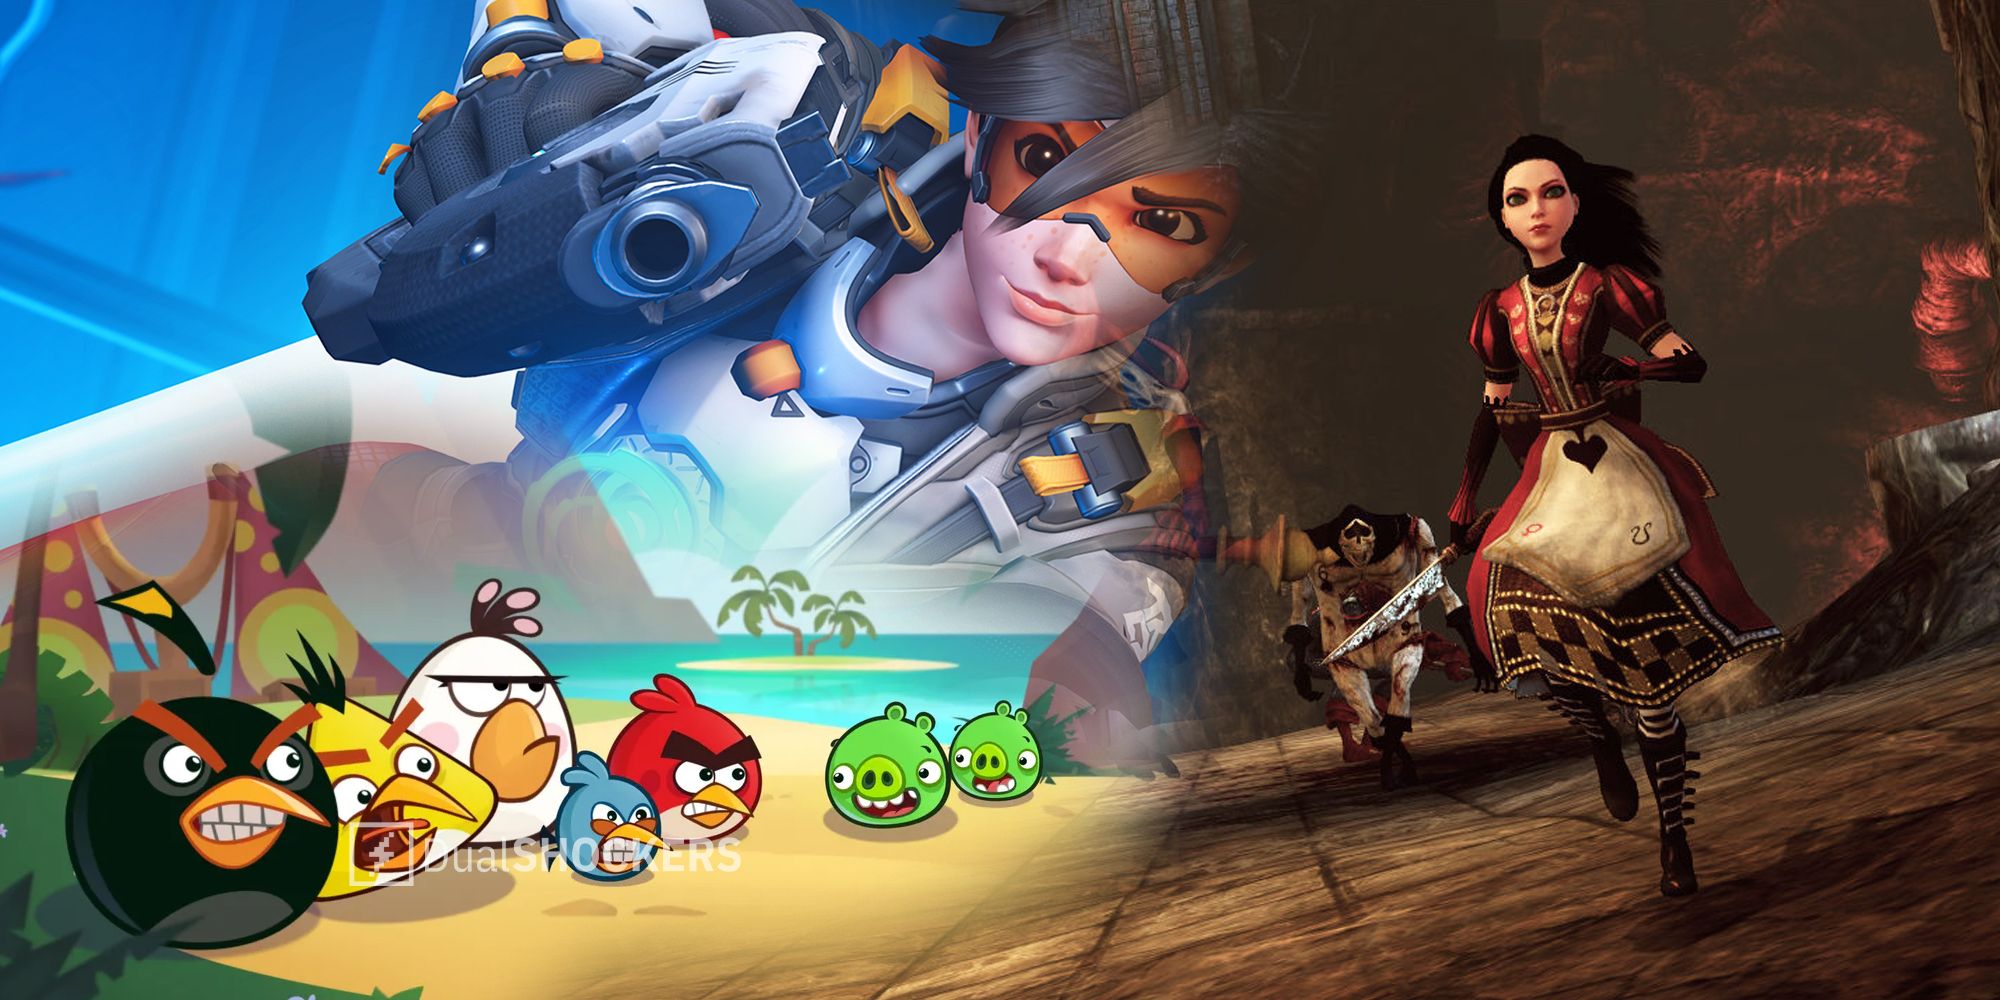 Angry Birds, Overwatch 2 Tracer, American McGee's Alice trilogy games